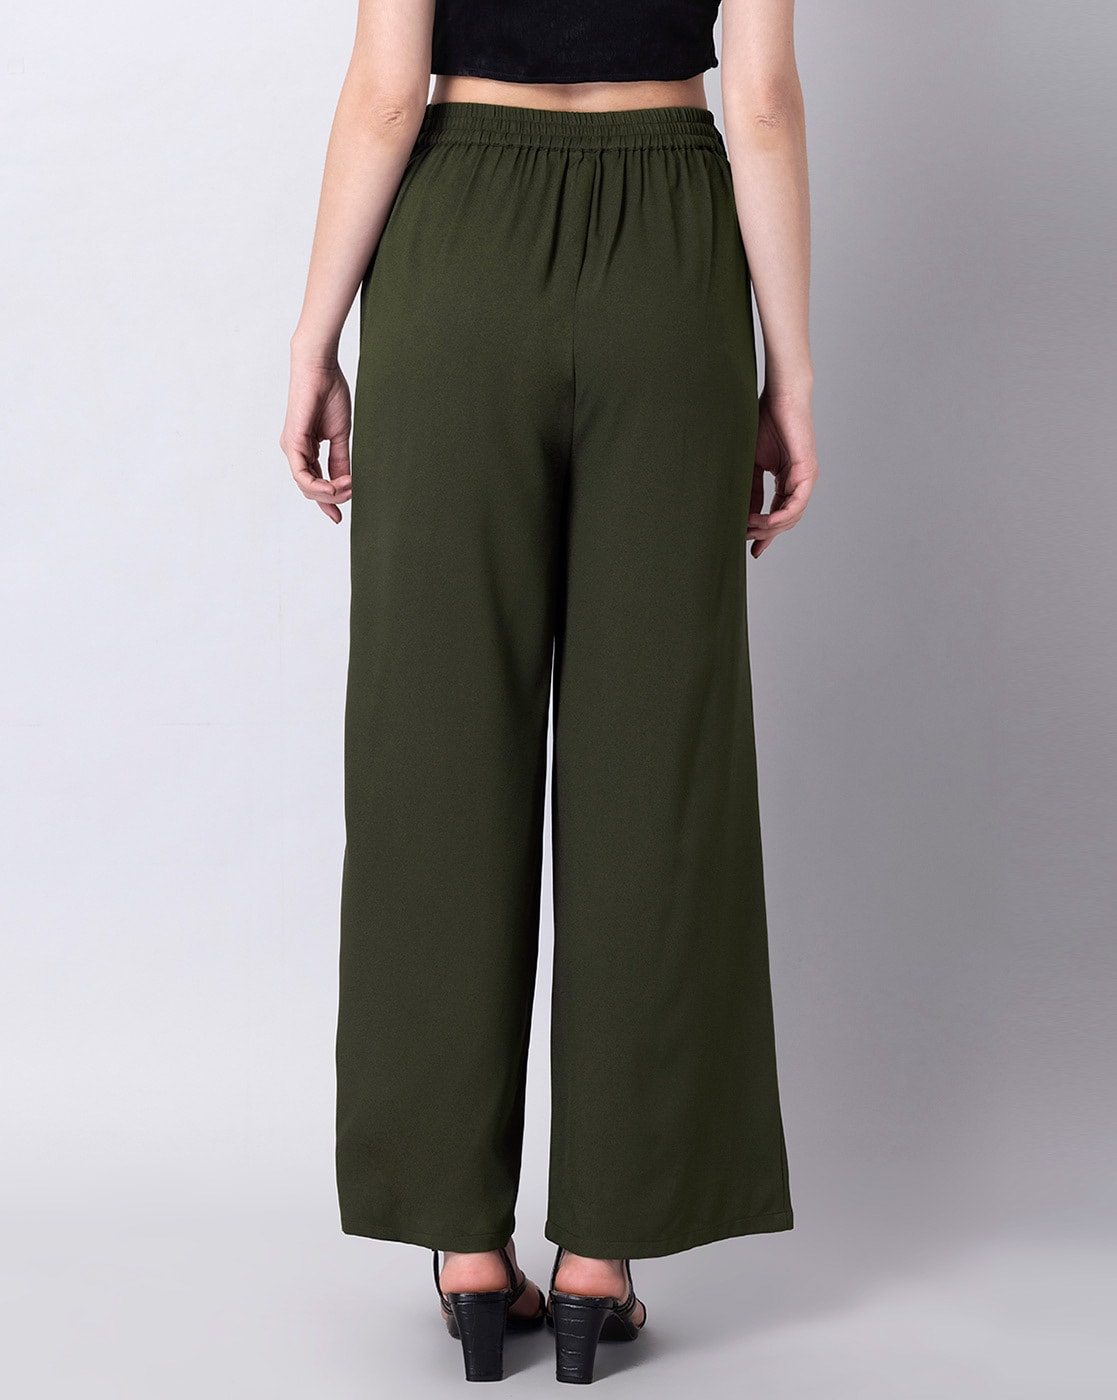 Free Flowin' Pants, Olive – Chic Soul